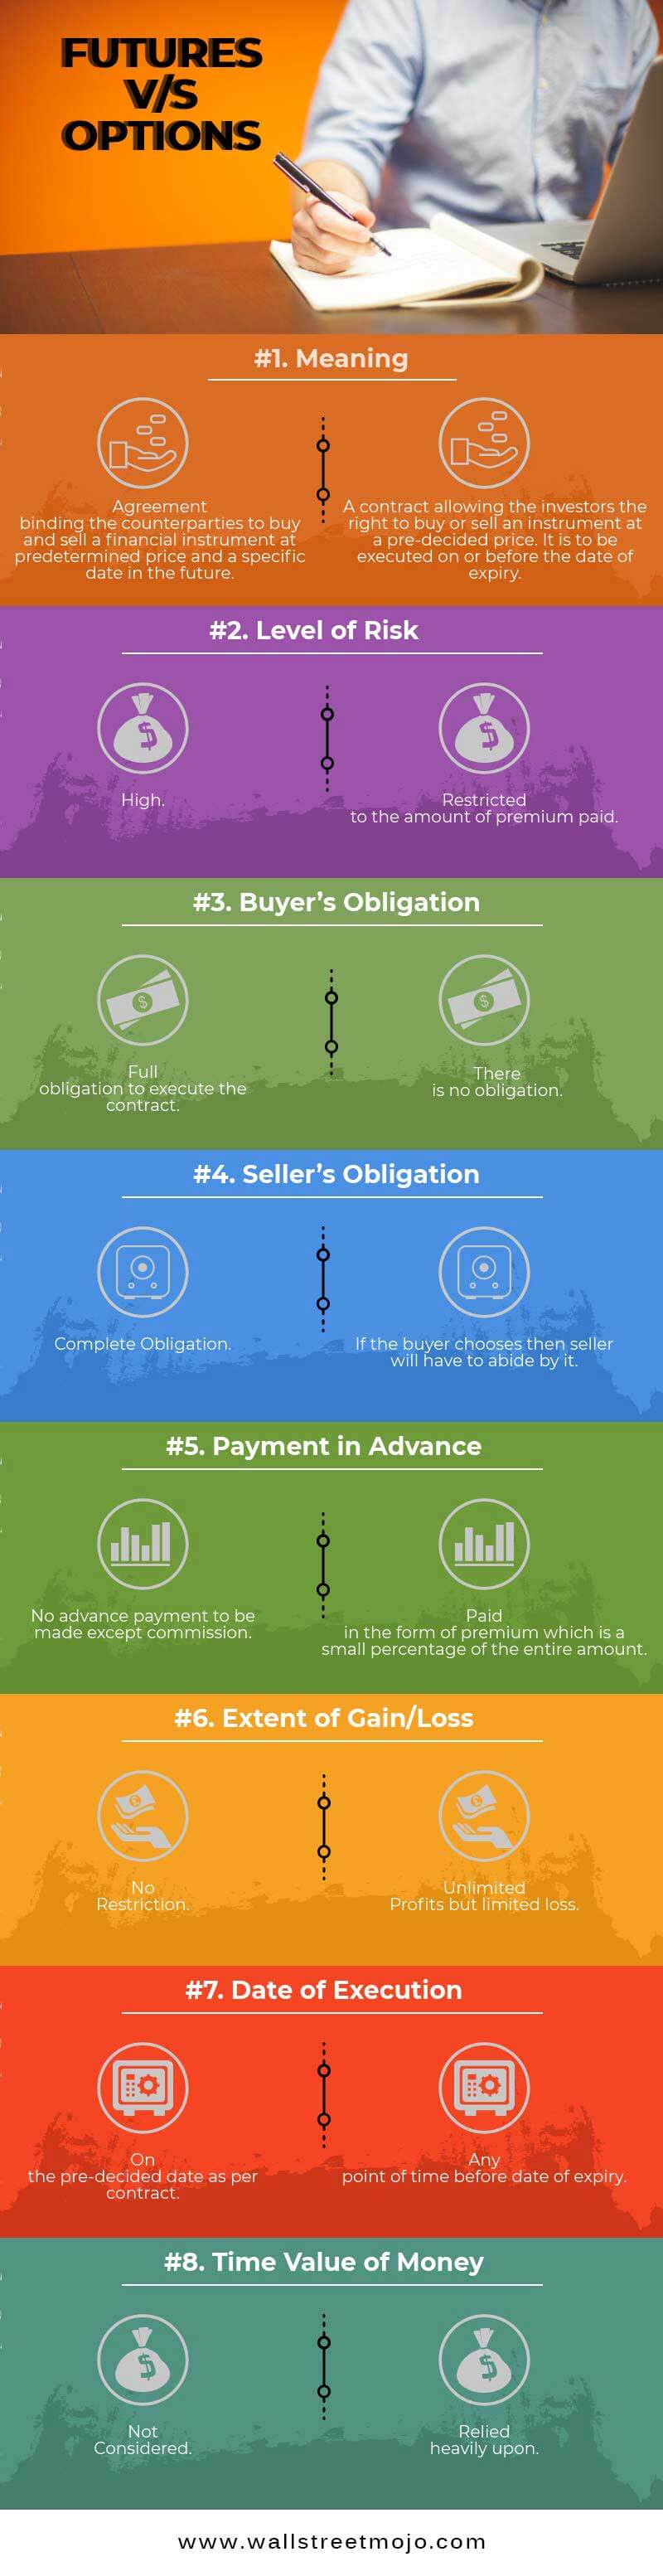 Futures vs Options Contract | Top 8 Differences (with Infographics)